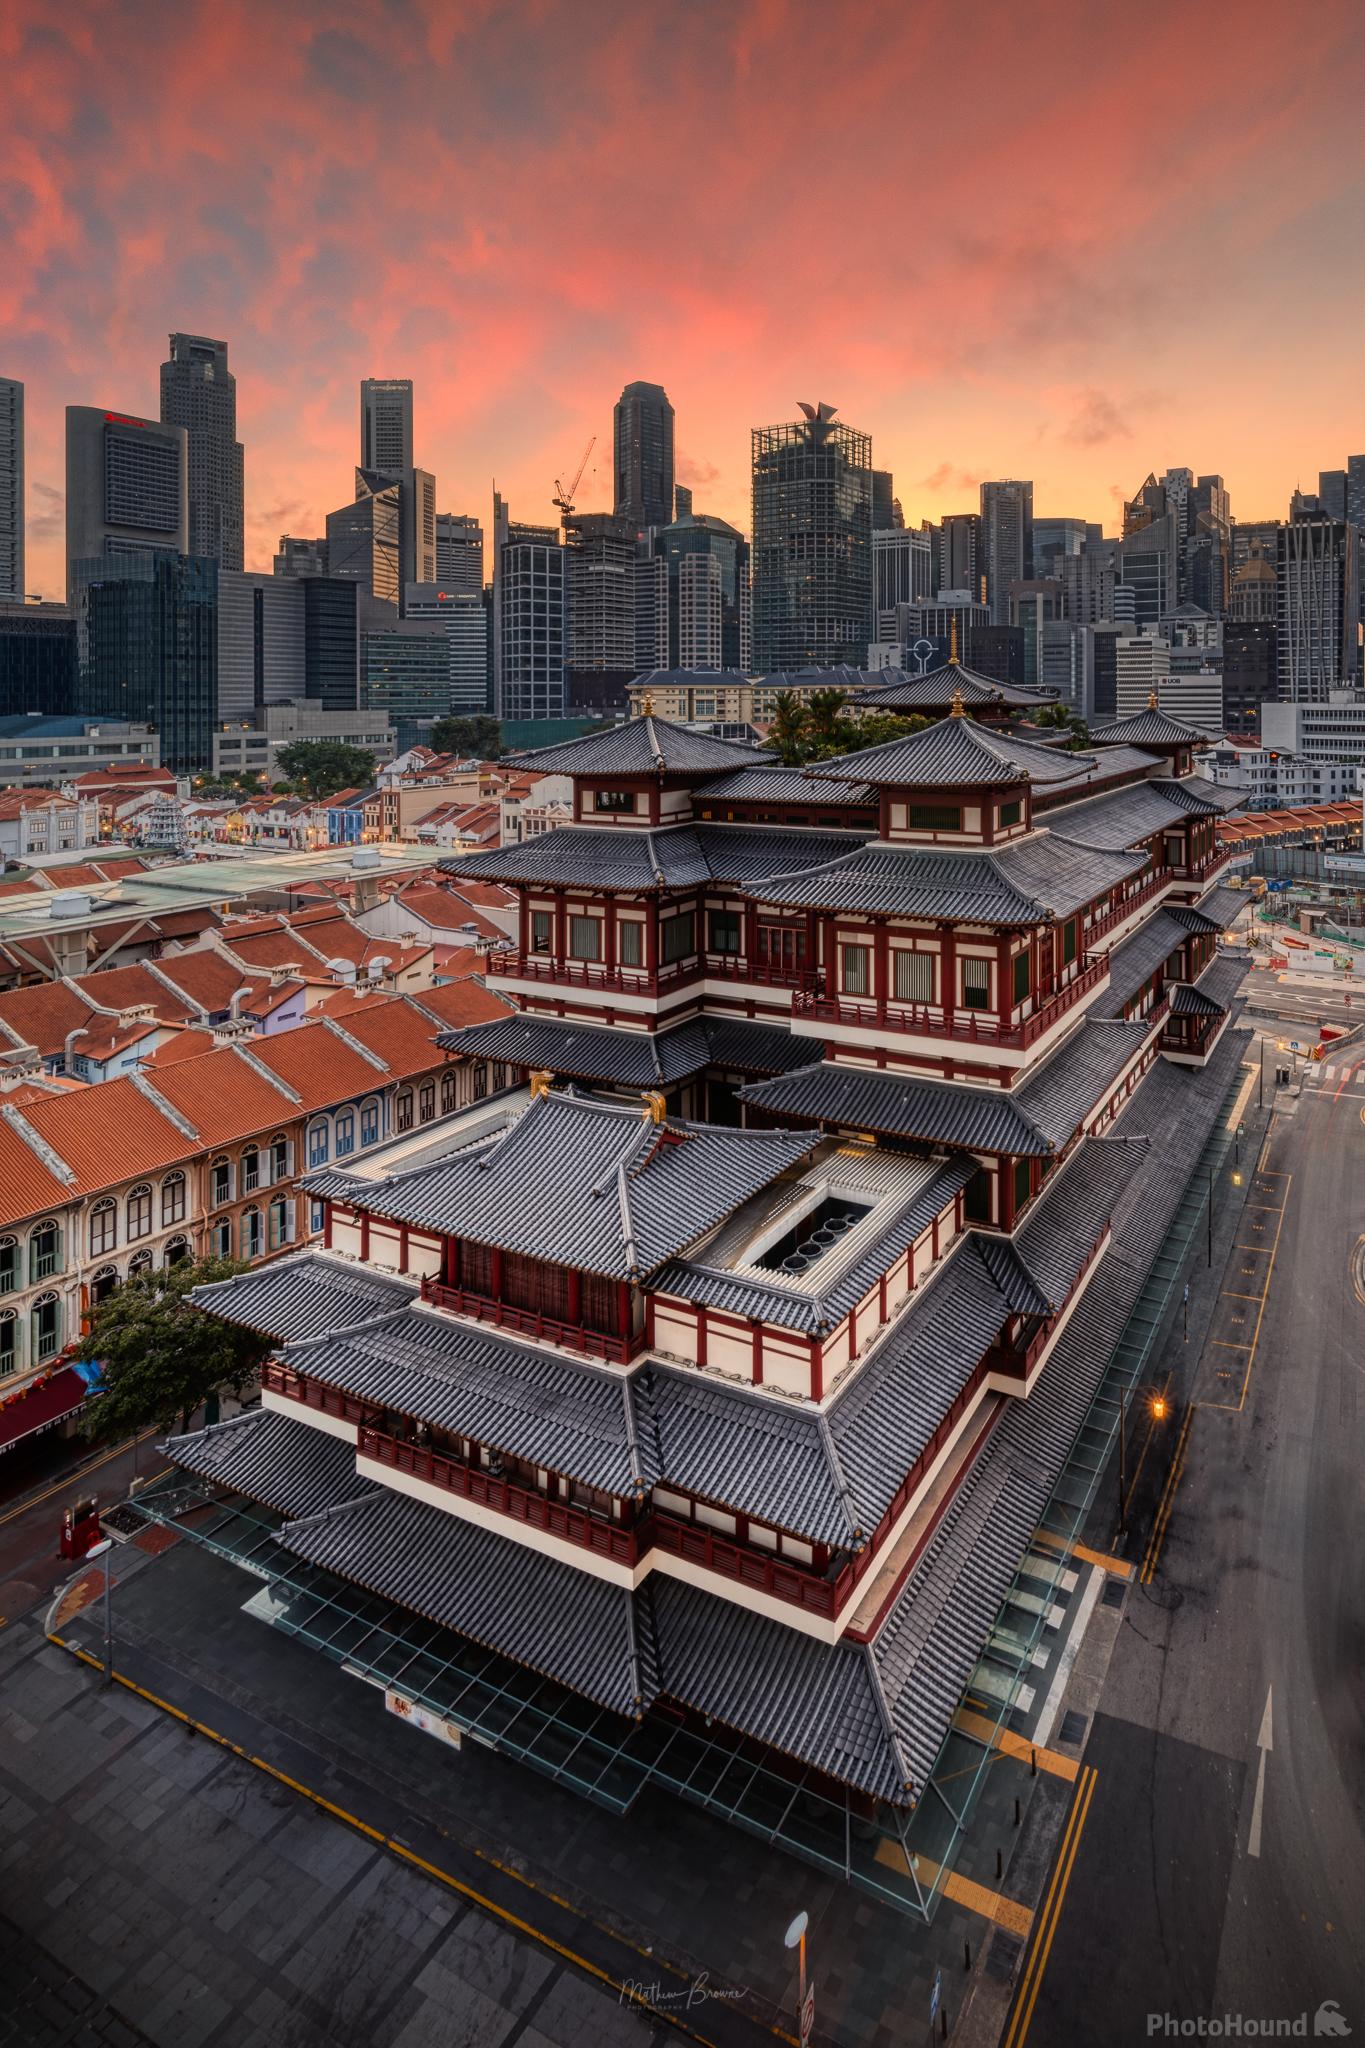 Image of Buddha Tooth Relic Temple - Elevated Viewpoint by Mathew Browne